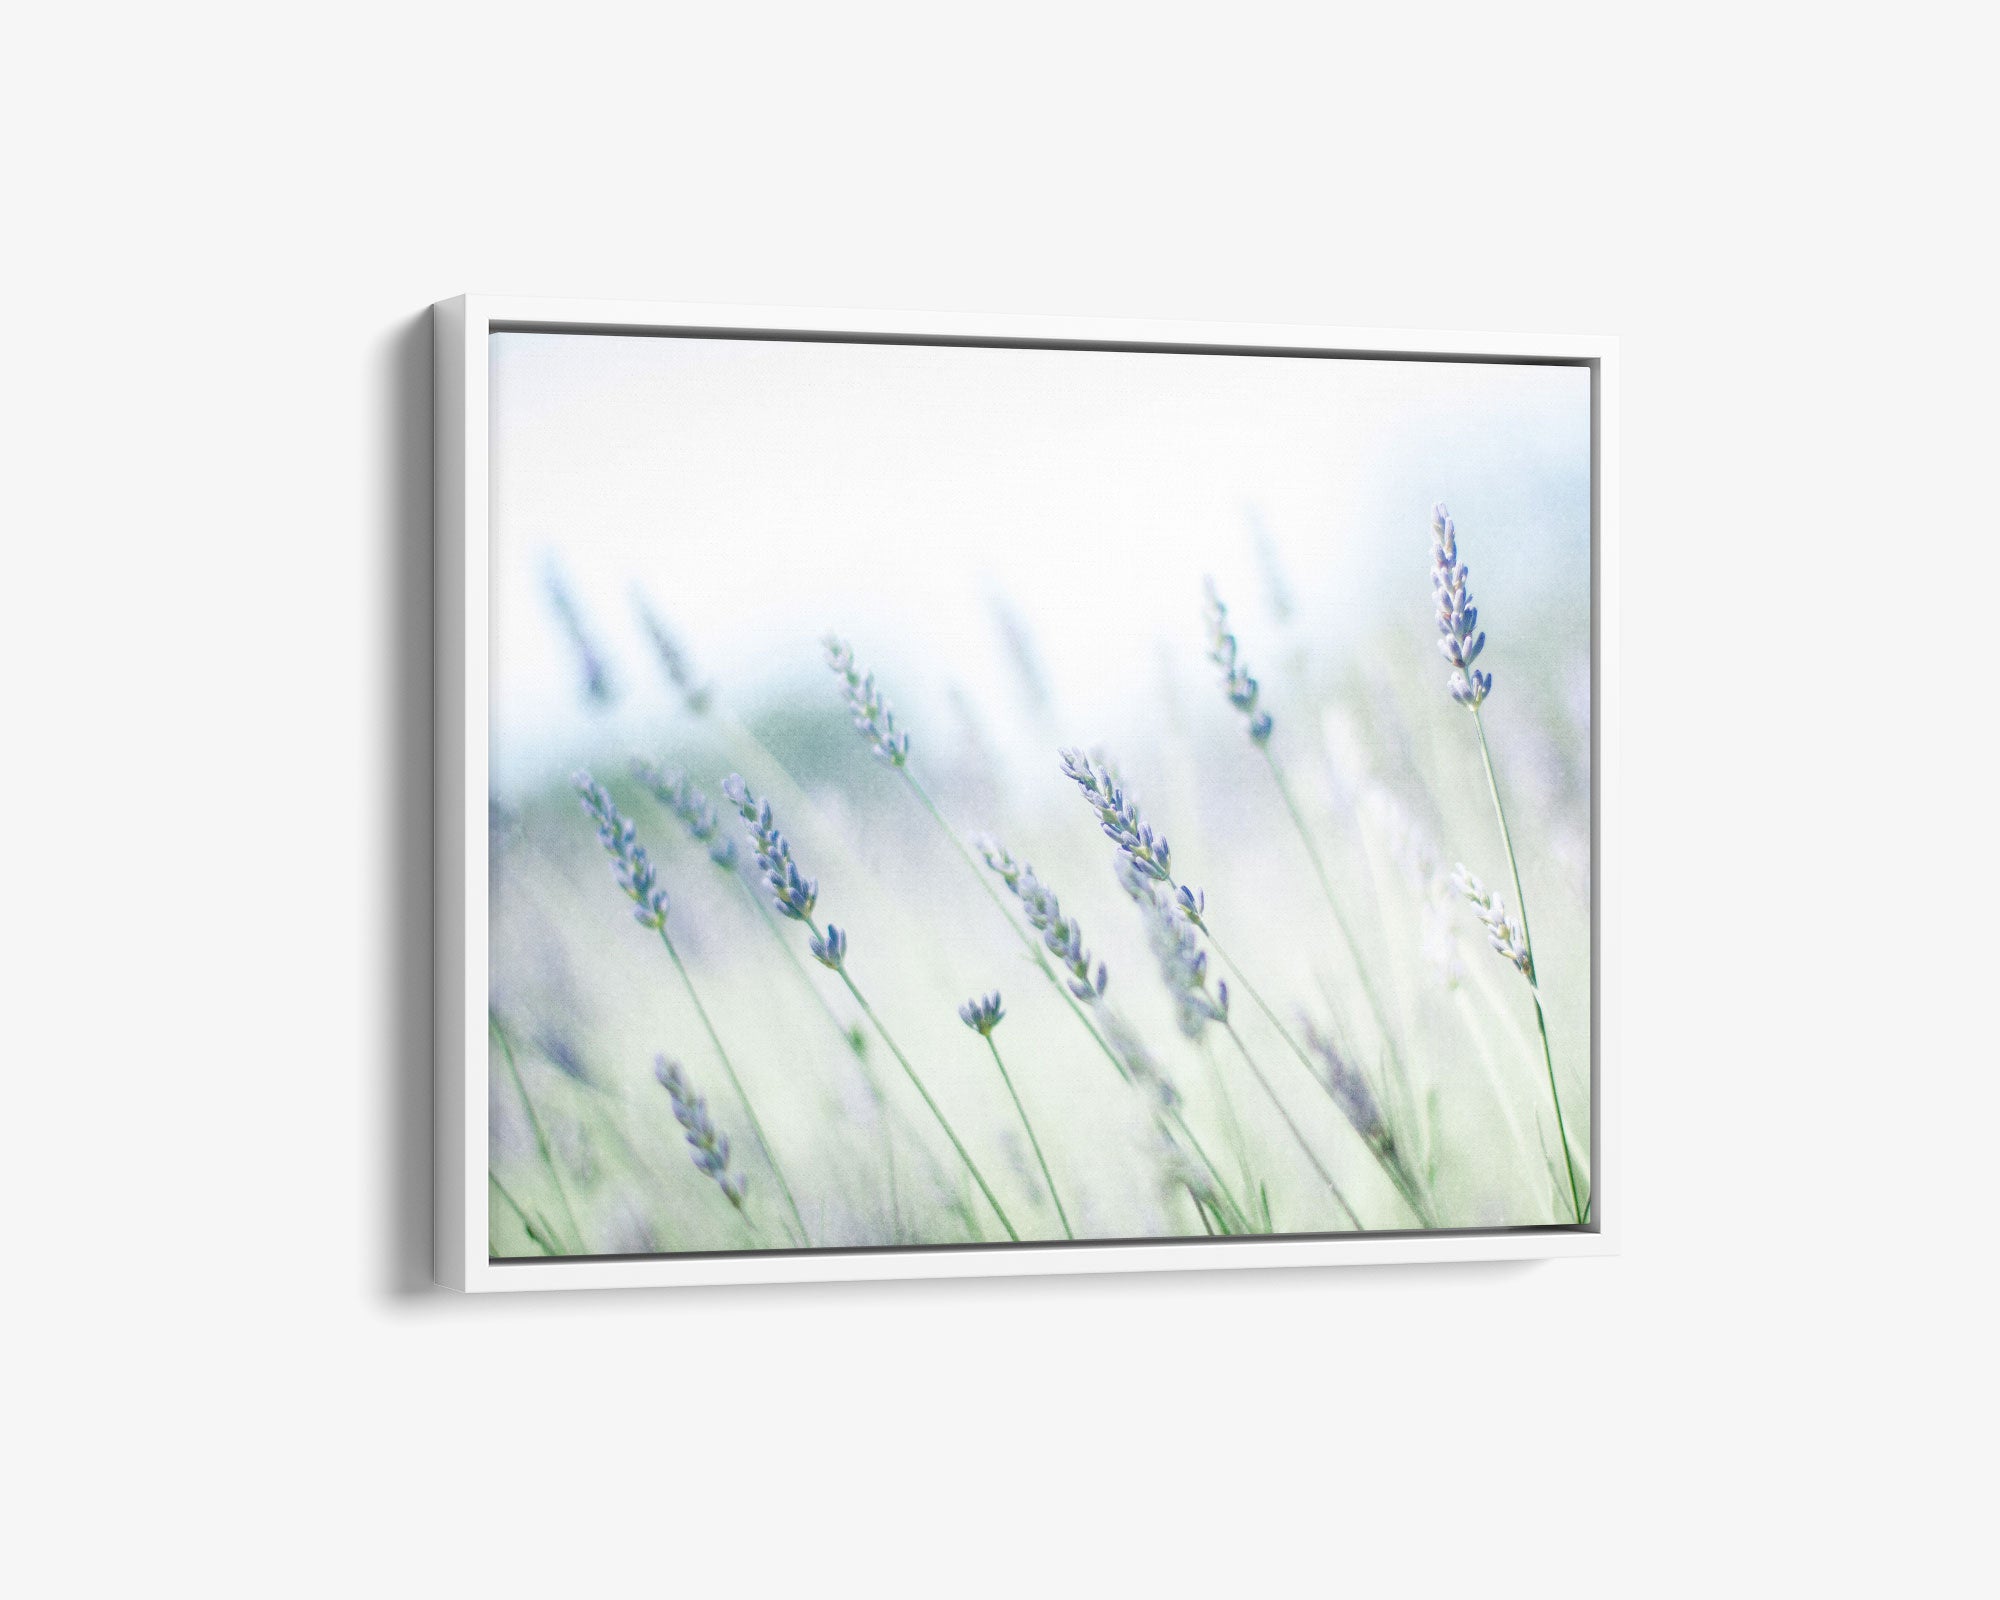 A framed Offley Green rustic farmhouse canvas wall art featuring &#39;Buds of Lavender&#39; gently swaying, with a soft focus background in soothing green and blue tones.